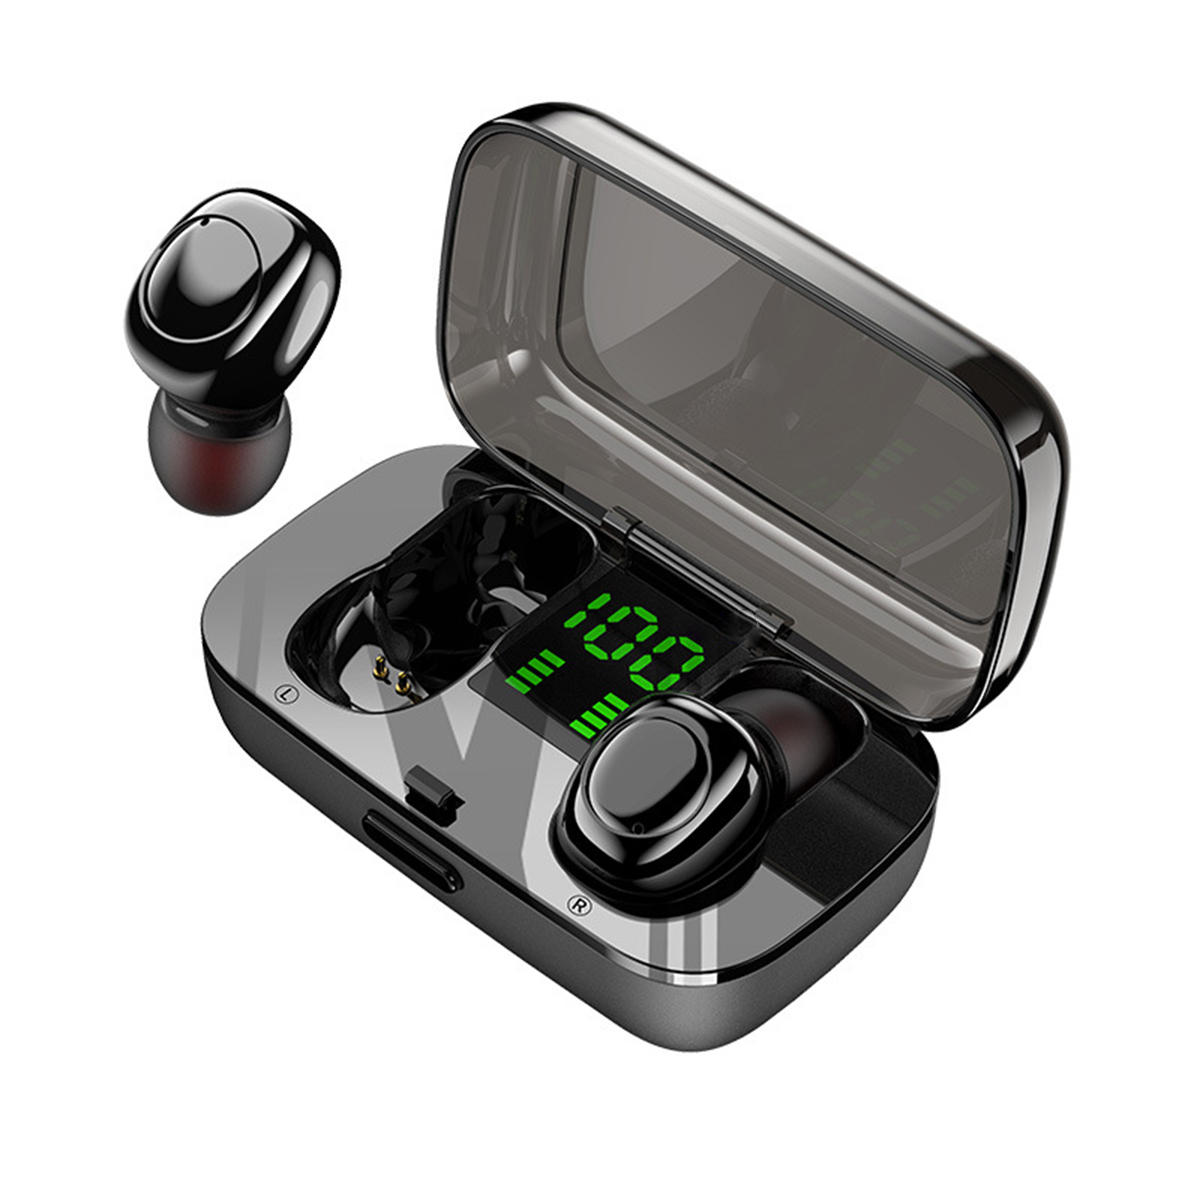 TWS Mini Portable bluetooth 5.0 Earphone Smart Touch Stereo Headphone with Charging Box